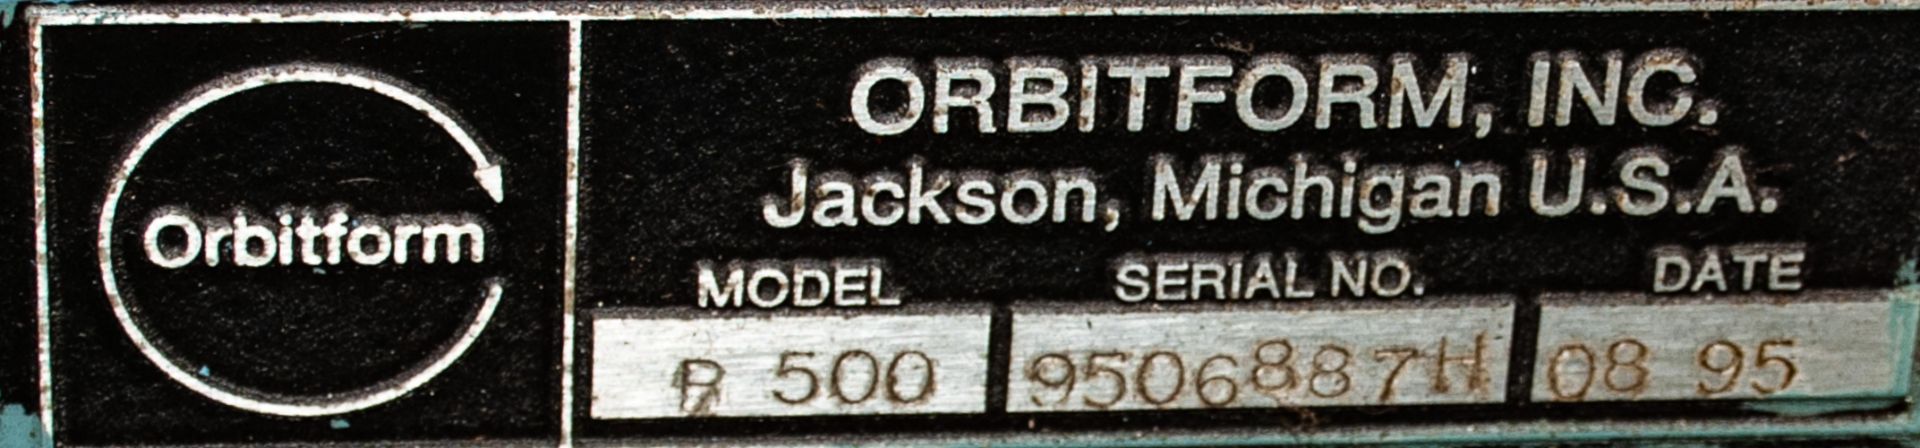 OrbitForm Radial Riveting Machine Mdl. B500 s/n 9506887H On Stand w/ Banner Light Curtain - Image 2 of 2